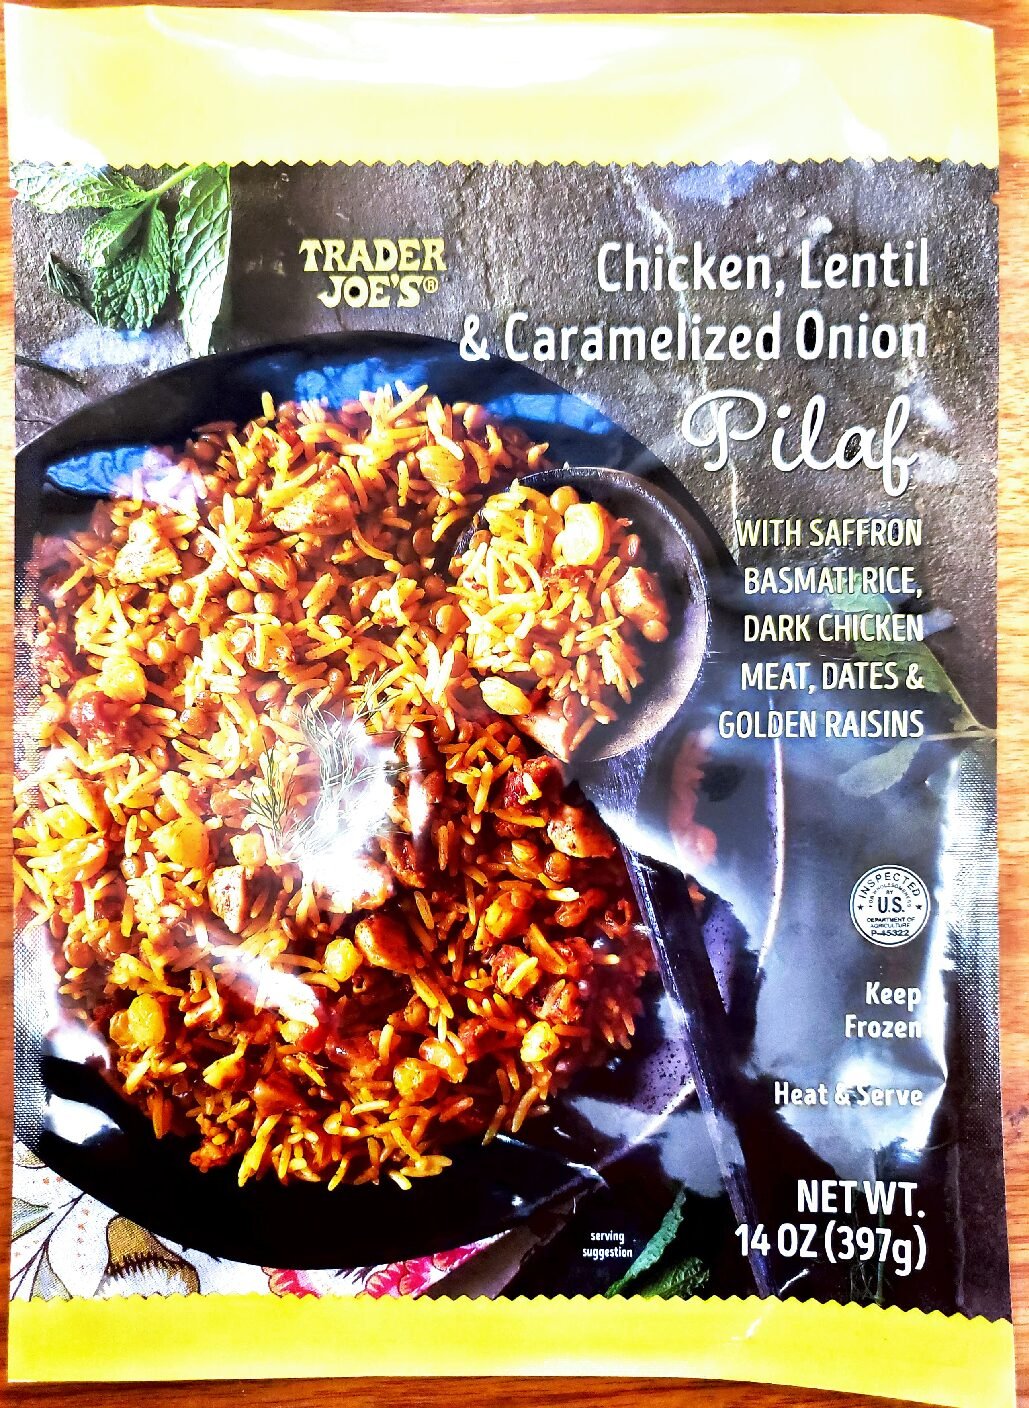 FSIS Issues Public Health Alert On Mama Vicky’s INC. Frozen Ready-To-Eat Chicken Pilaf Products Due to Possible Foreign Matter Contamination